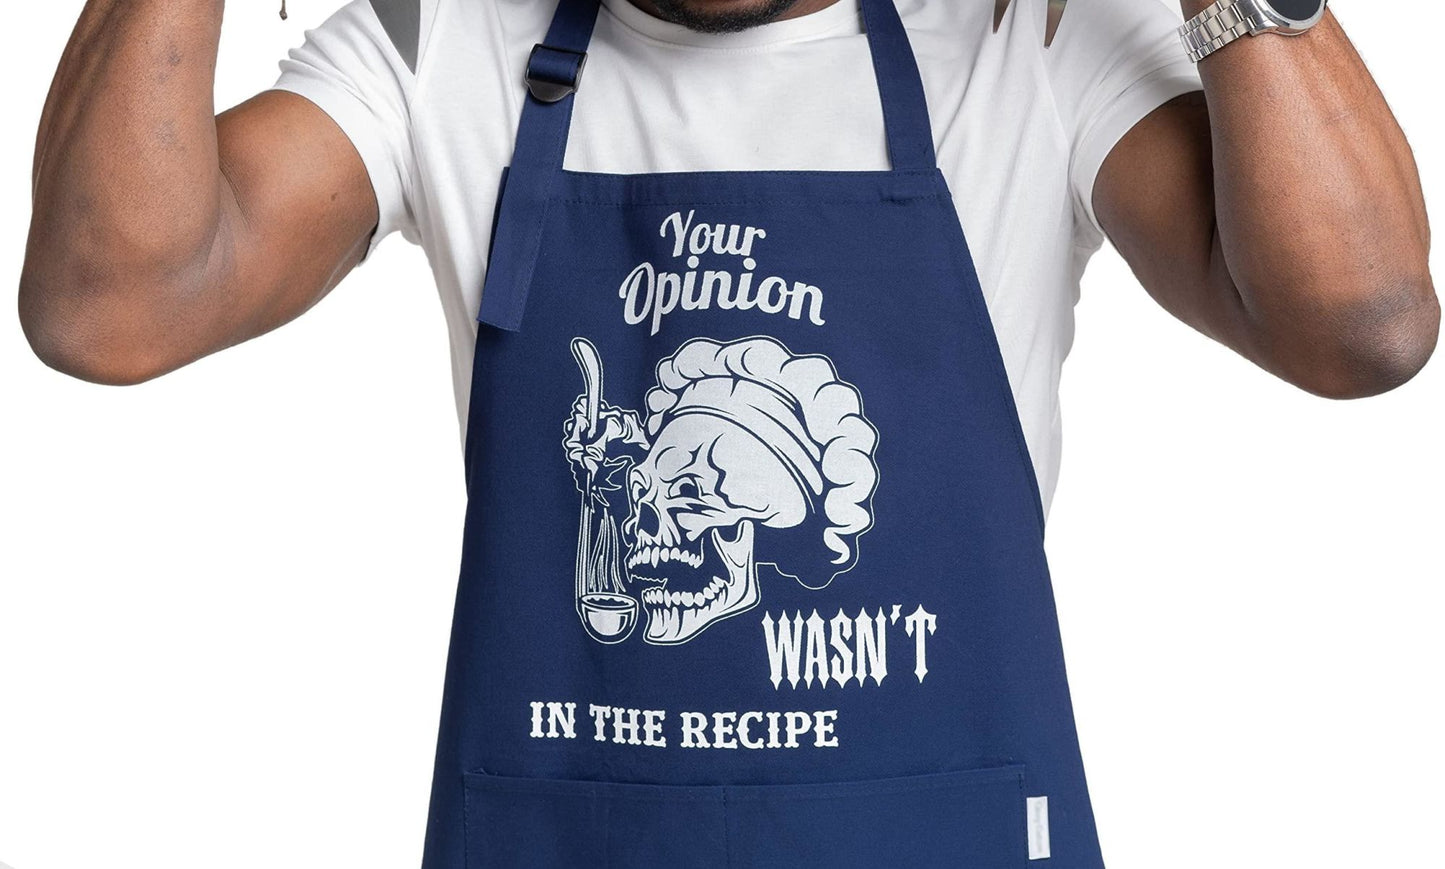 Funny Aprons For Men Mens Aprons For Cooking High-Quality Sturdy Grill Apron